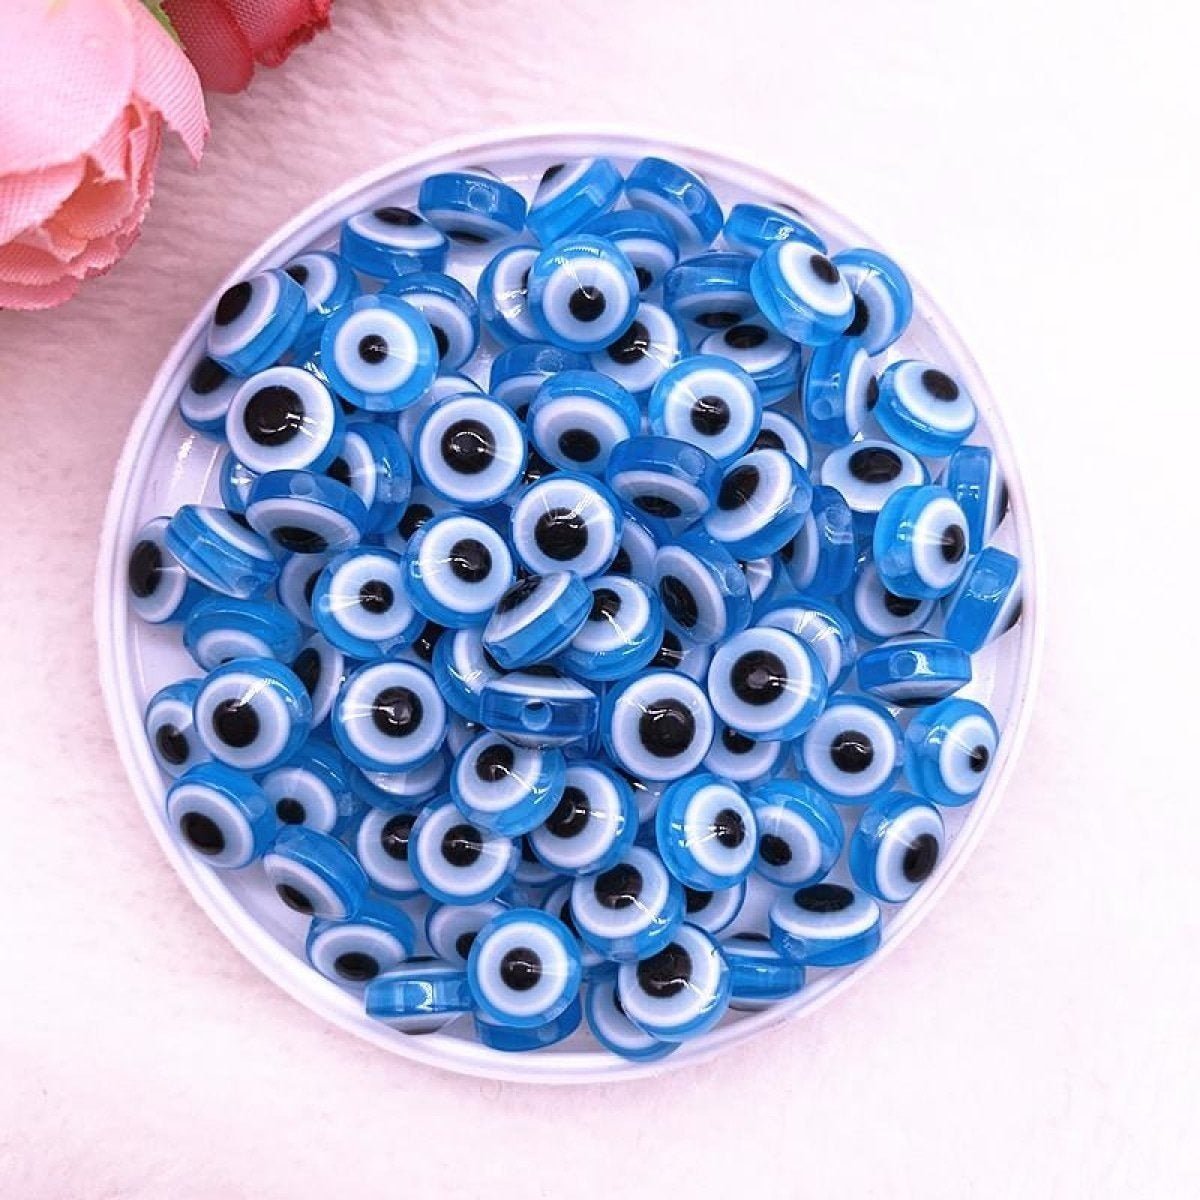 48pcs 8/10mm Resin Spacer Beads Double Sided Eyes for Jewelry Making DIY Bracelet Beads Flat Backing - Light Blue 8mm - - Asia Sell